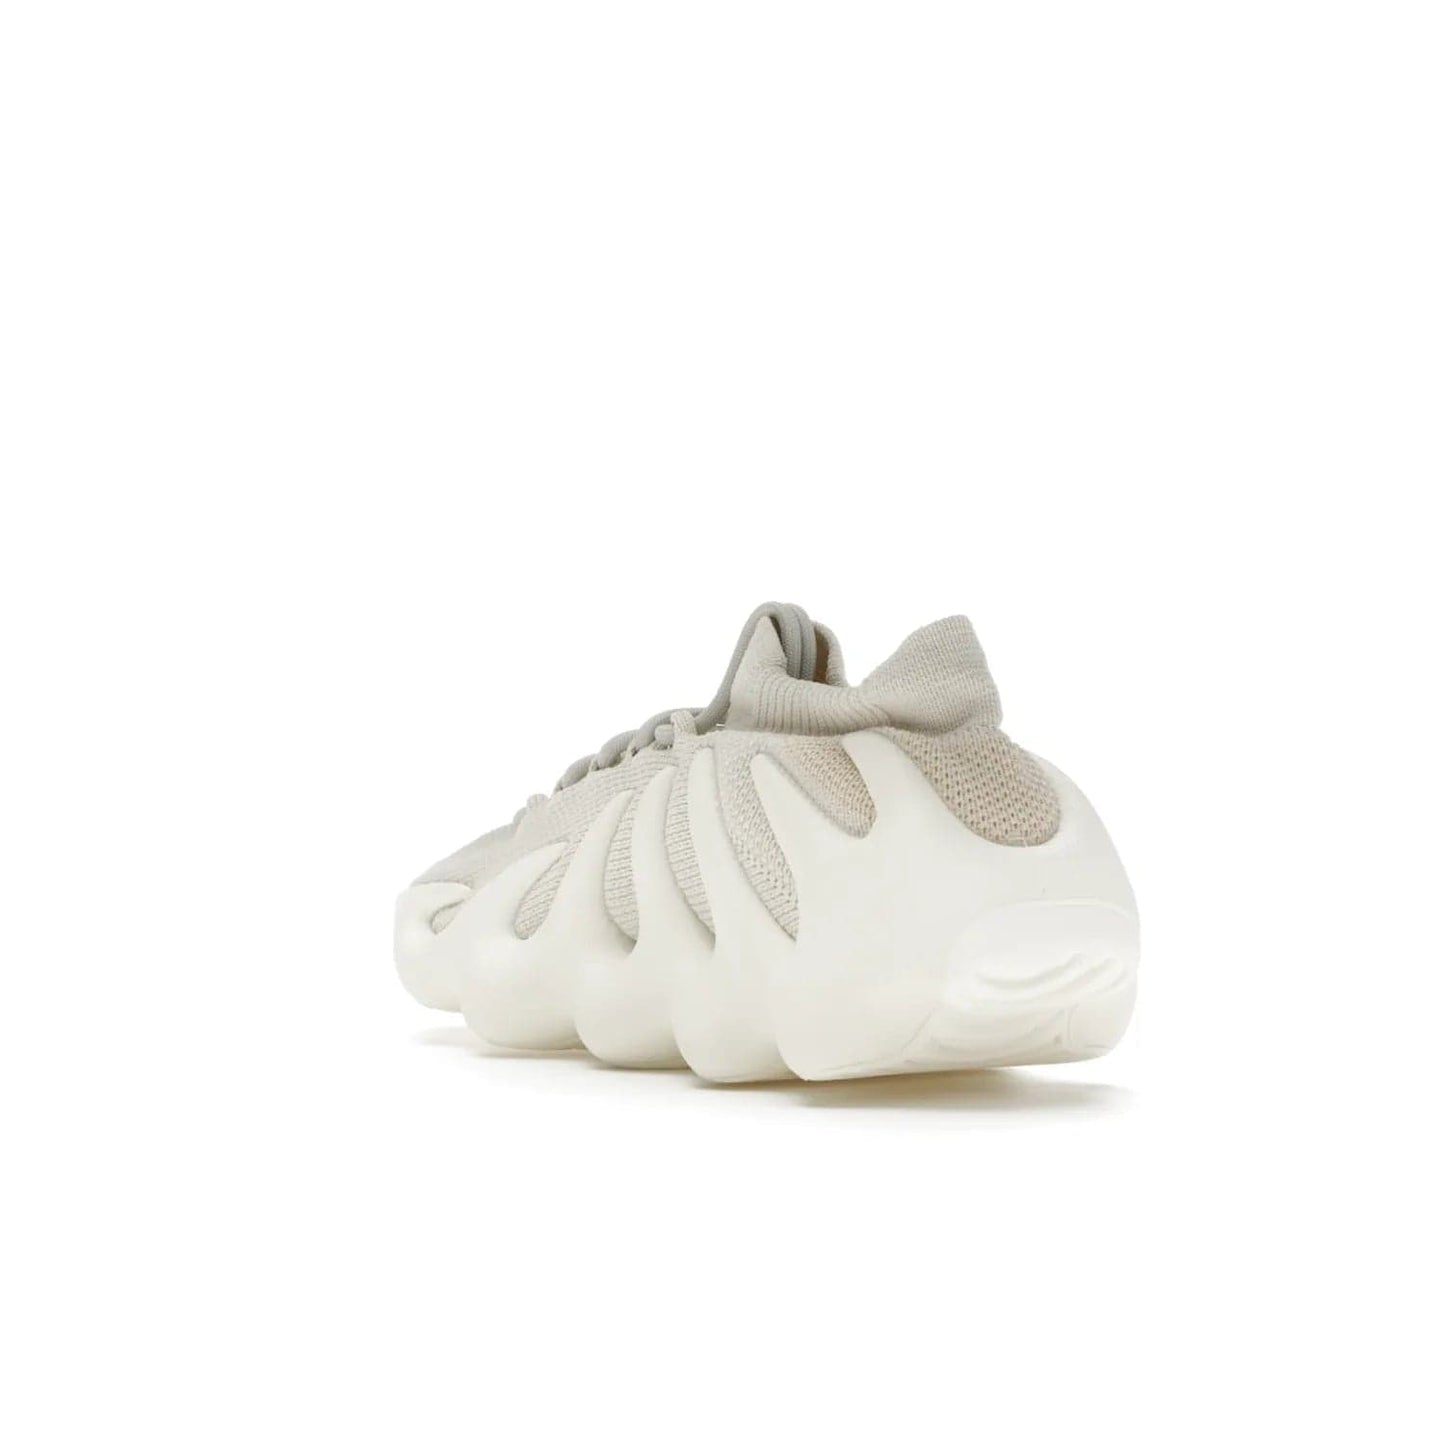 adidas Yeezy 450 Cloud White - Image 25 - Only at www.BallersClubKickz.com - Experience the future with the adidas Yeezy 450 Cloud White. A two-piece design featuring an extreme foam sole and mesh upper, this silhouette is expected to release in March 2021. Get your hands on this striking Cloud White/Cloud White colorway and stand out in the crowd.